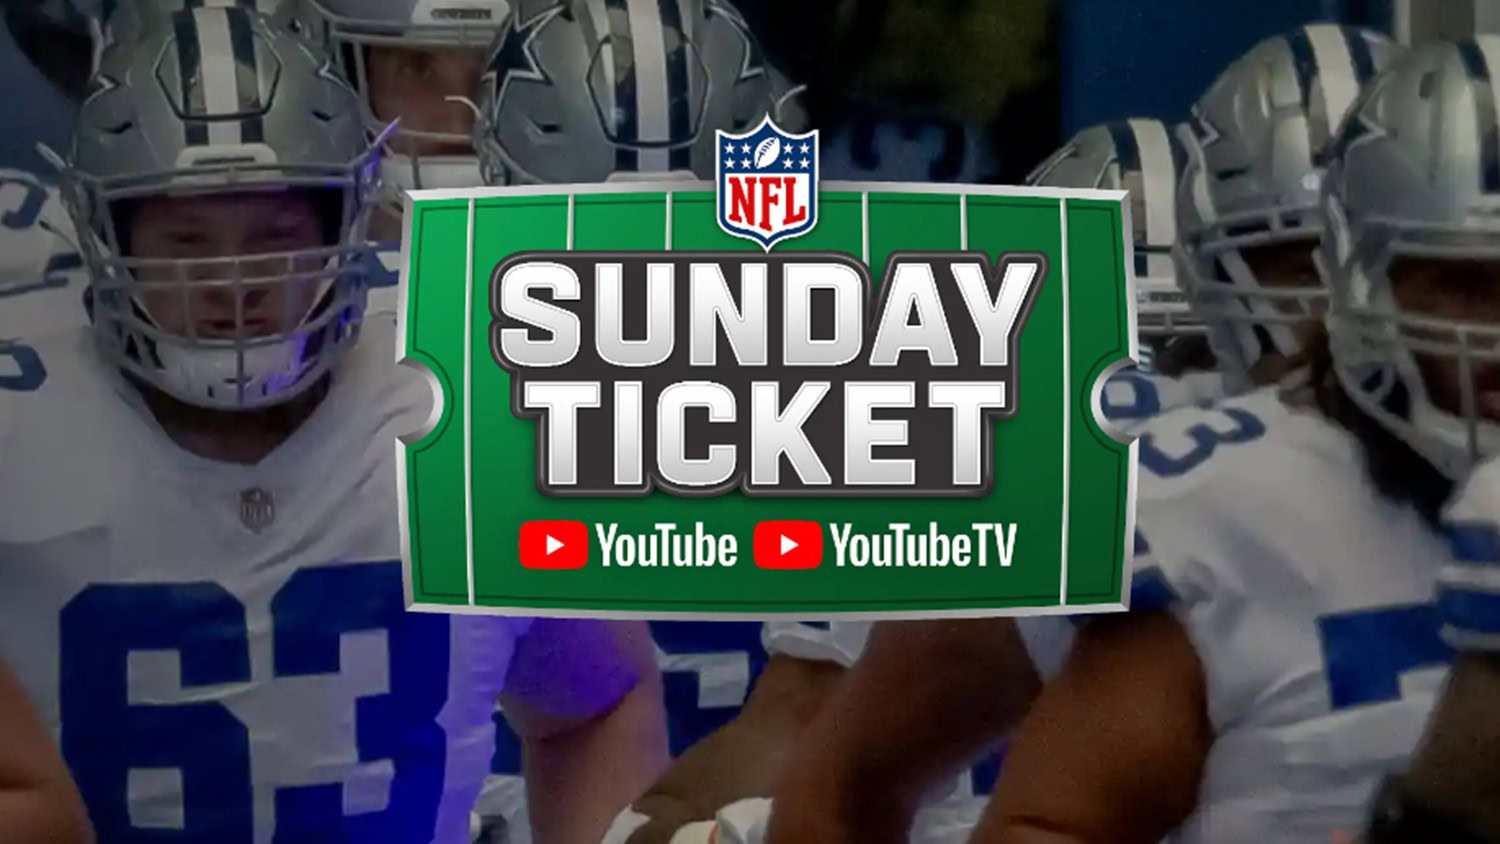 NFL Sunday Ticket Deals, plans, and more Android Authority